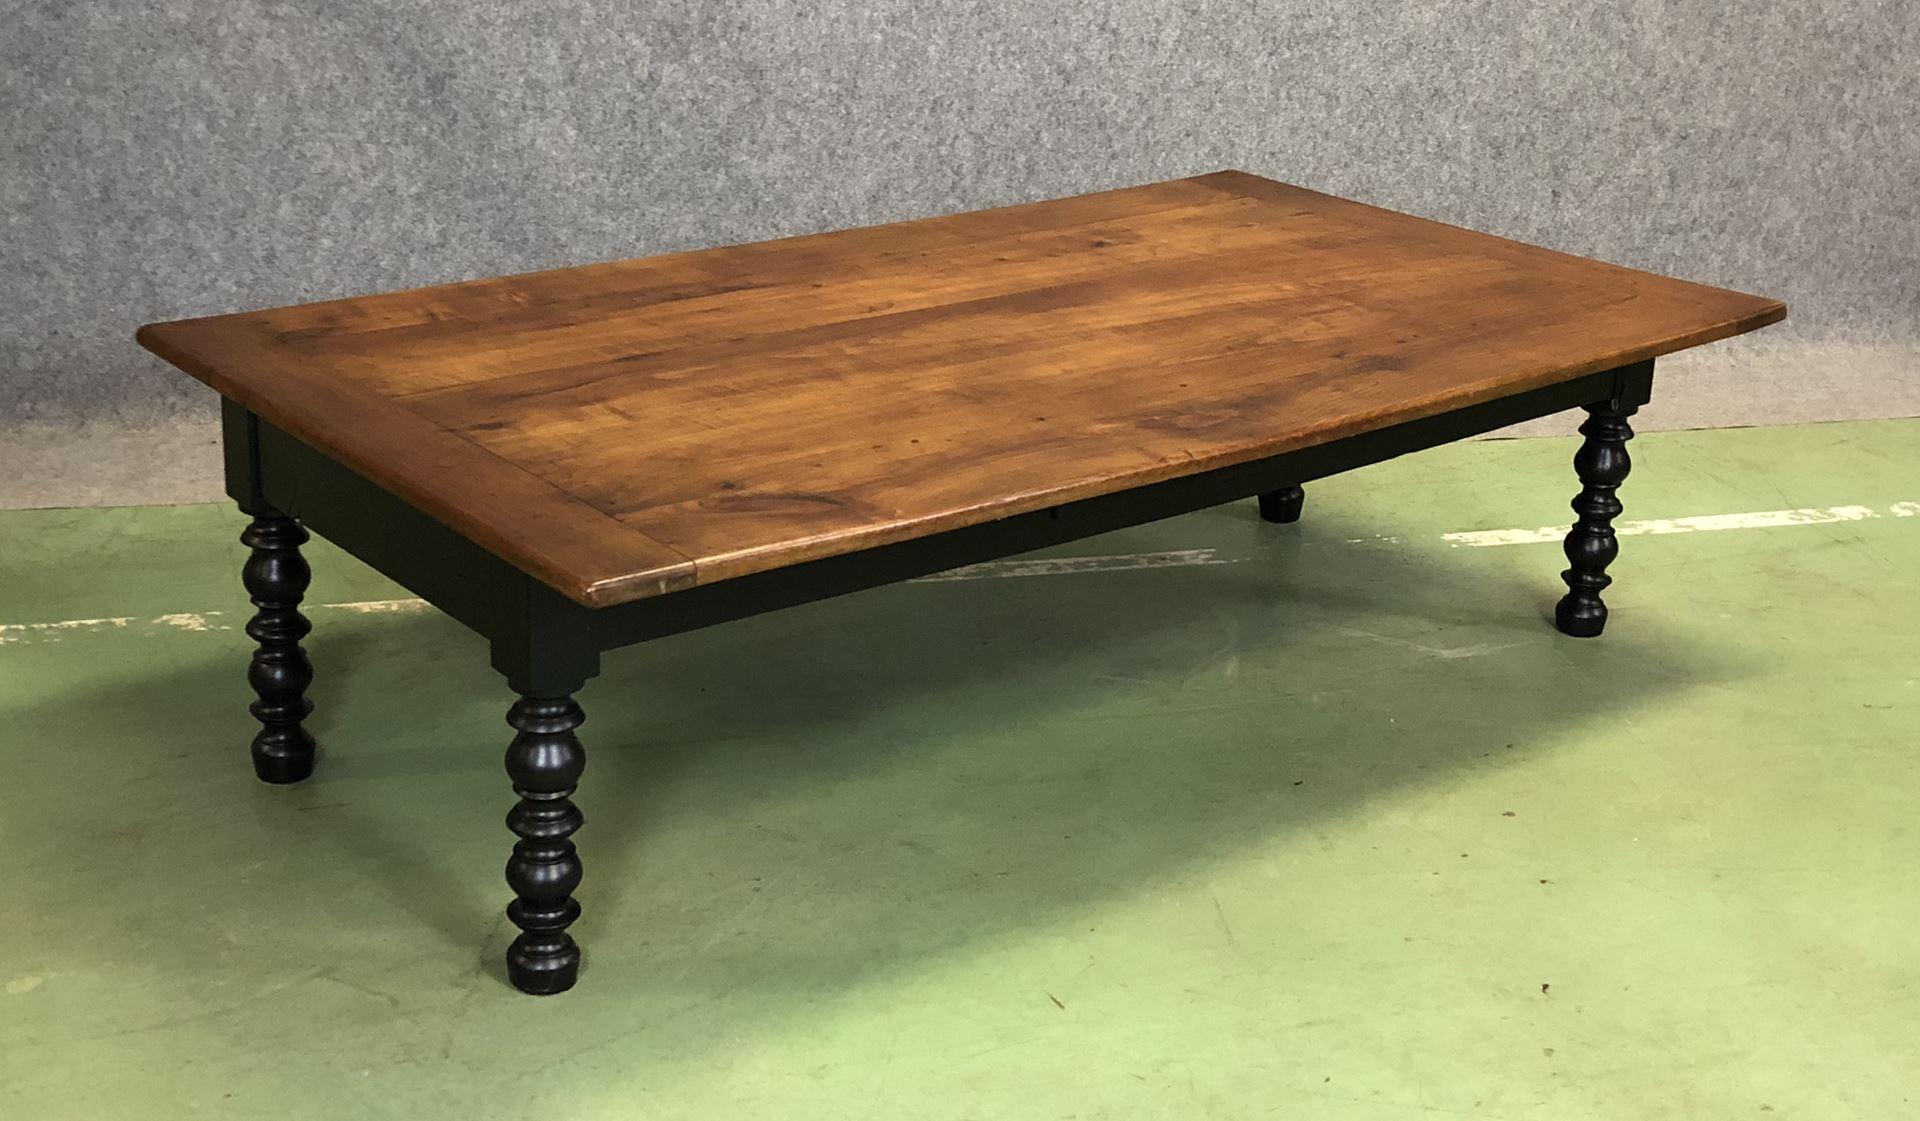 19th century fruitwood coffee table with black foot painted.